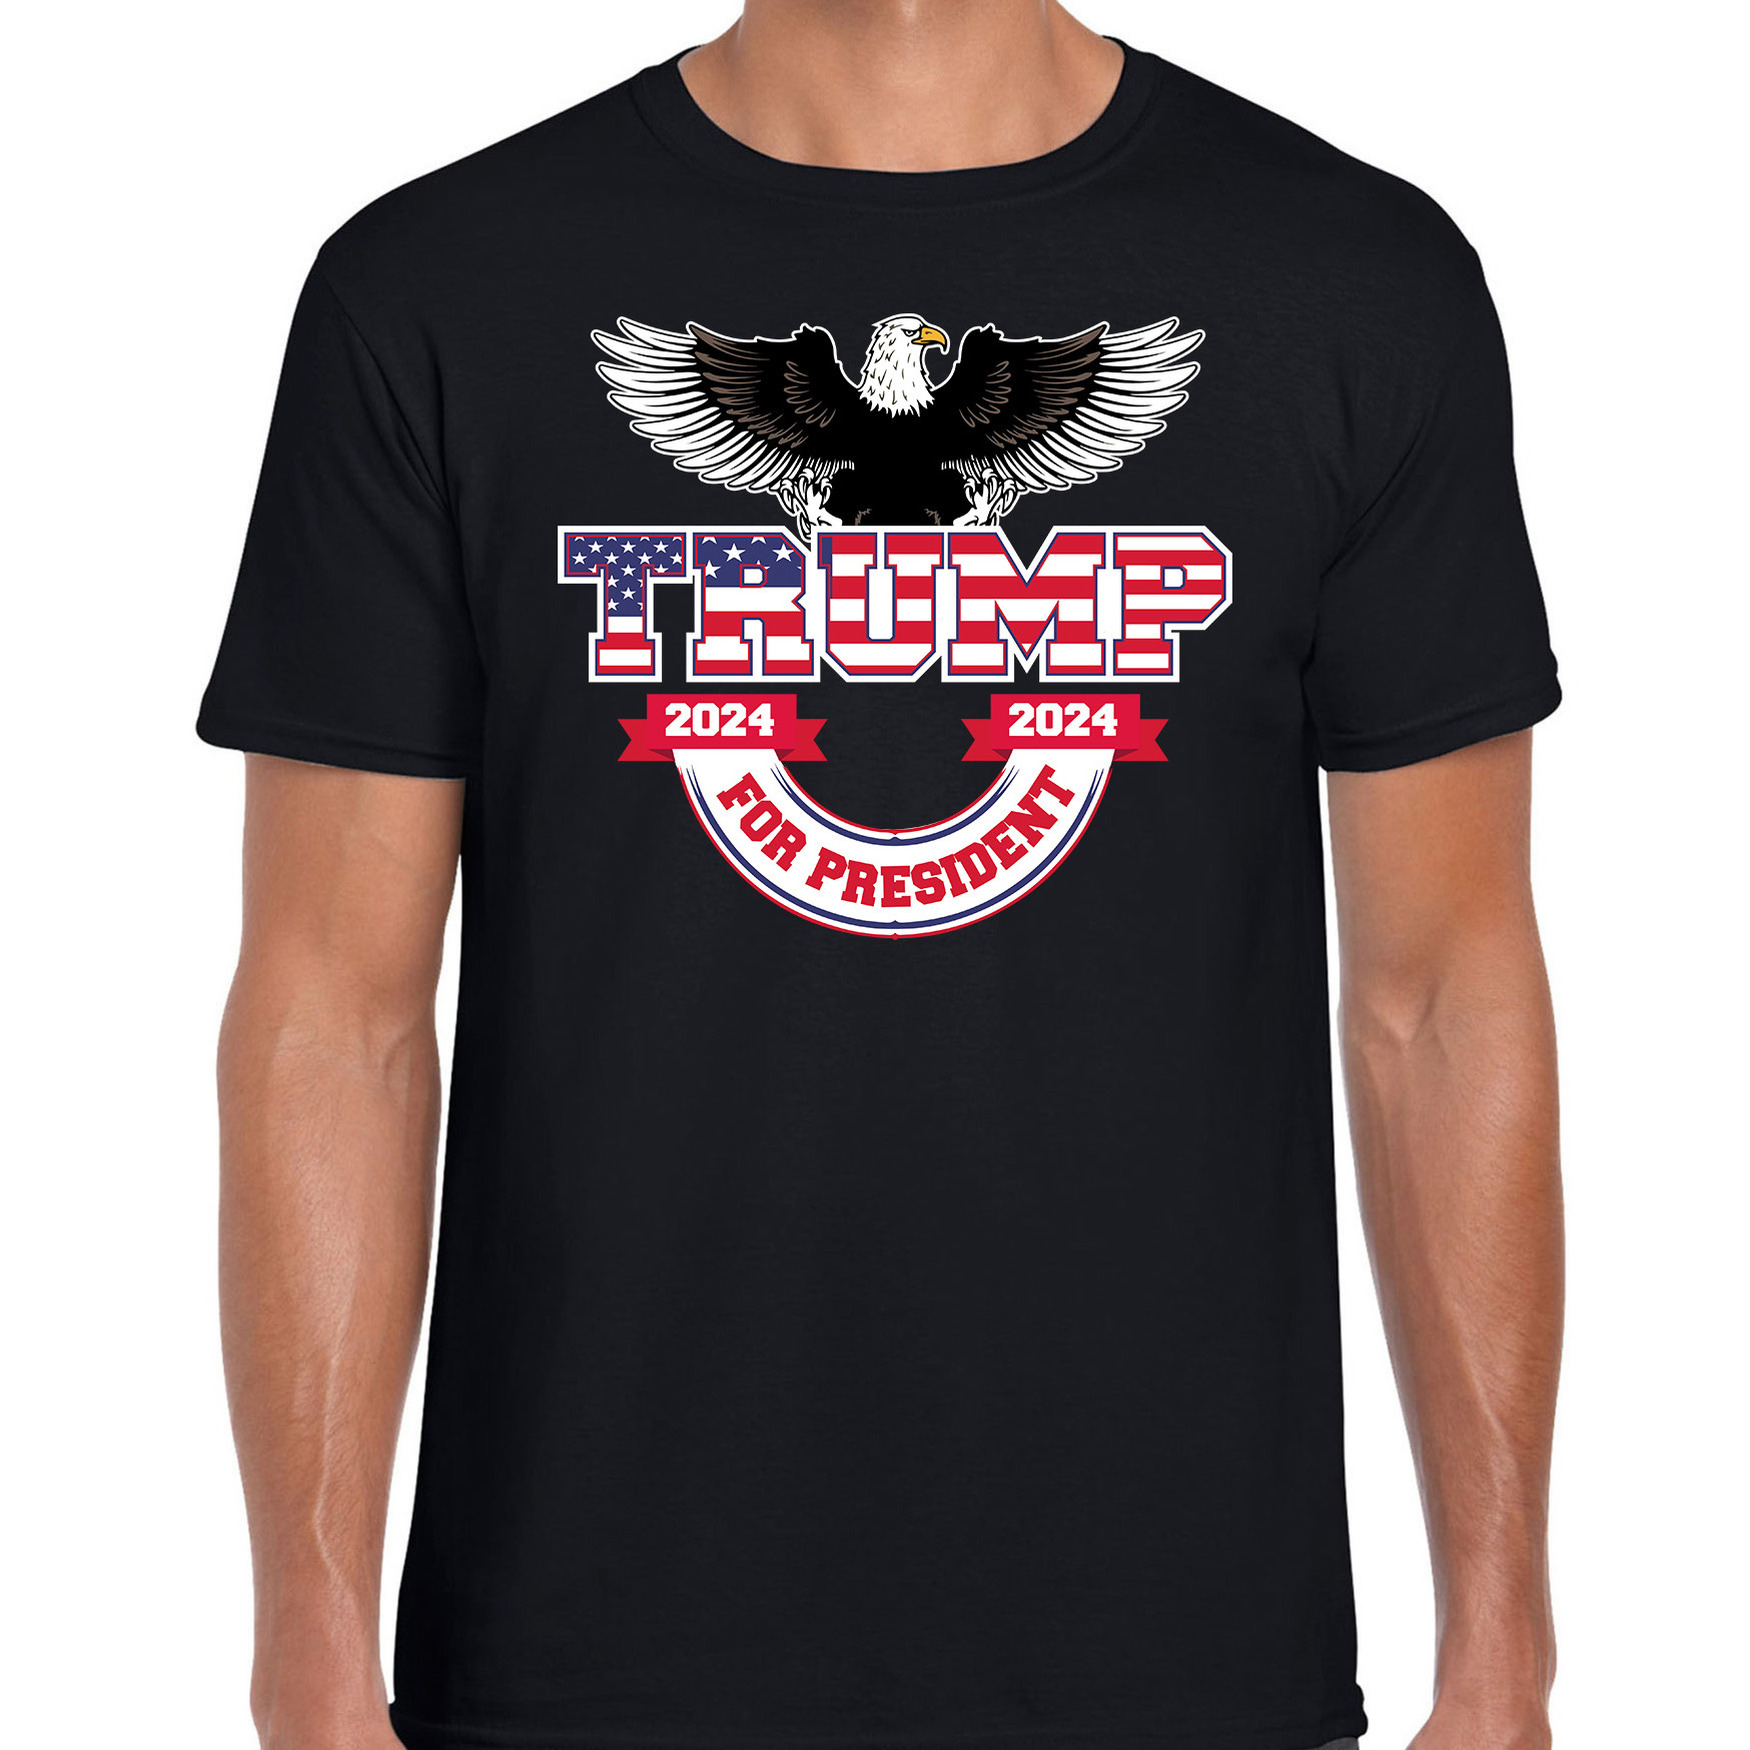 T-shirt Trump heren - american eagle - grappig/fout voor carnaval 2XL -